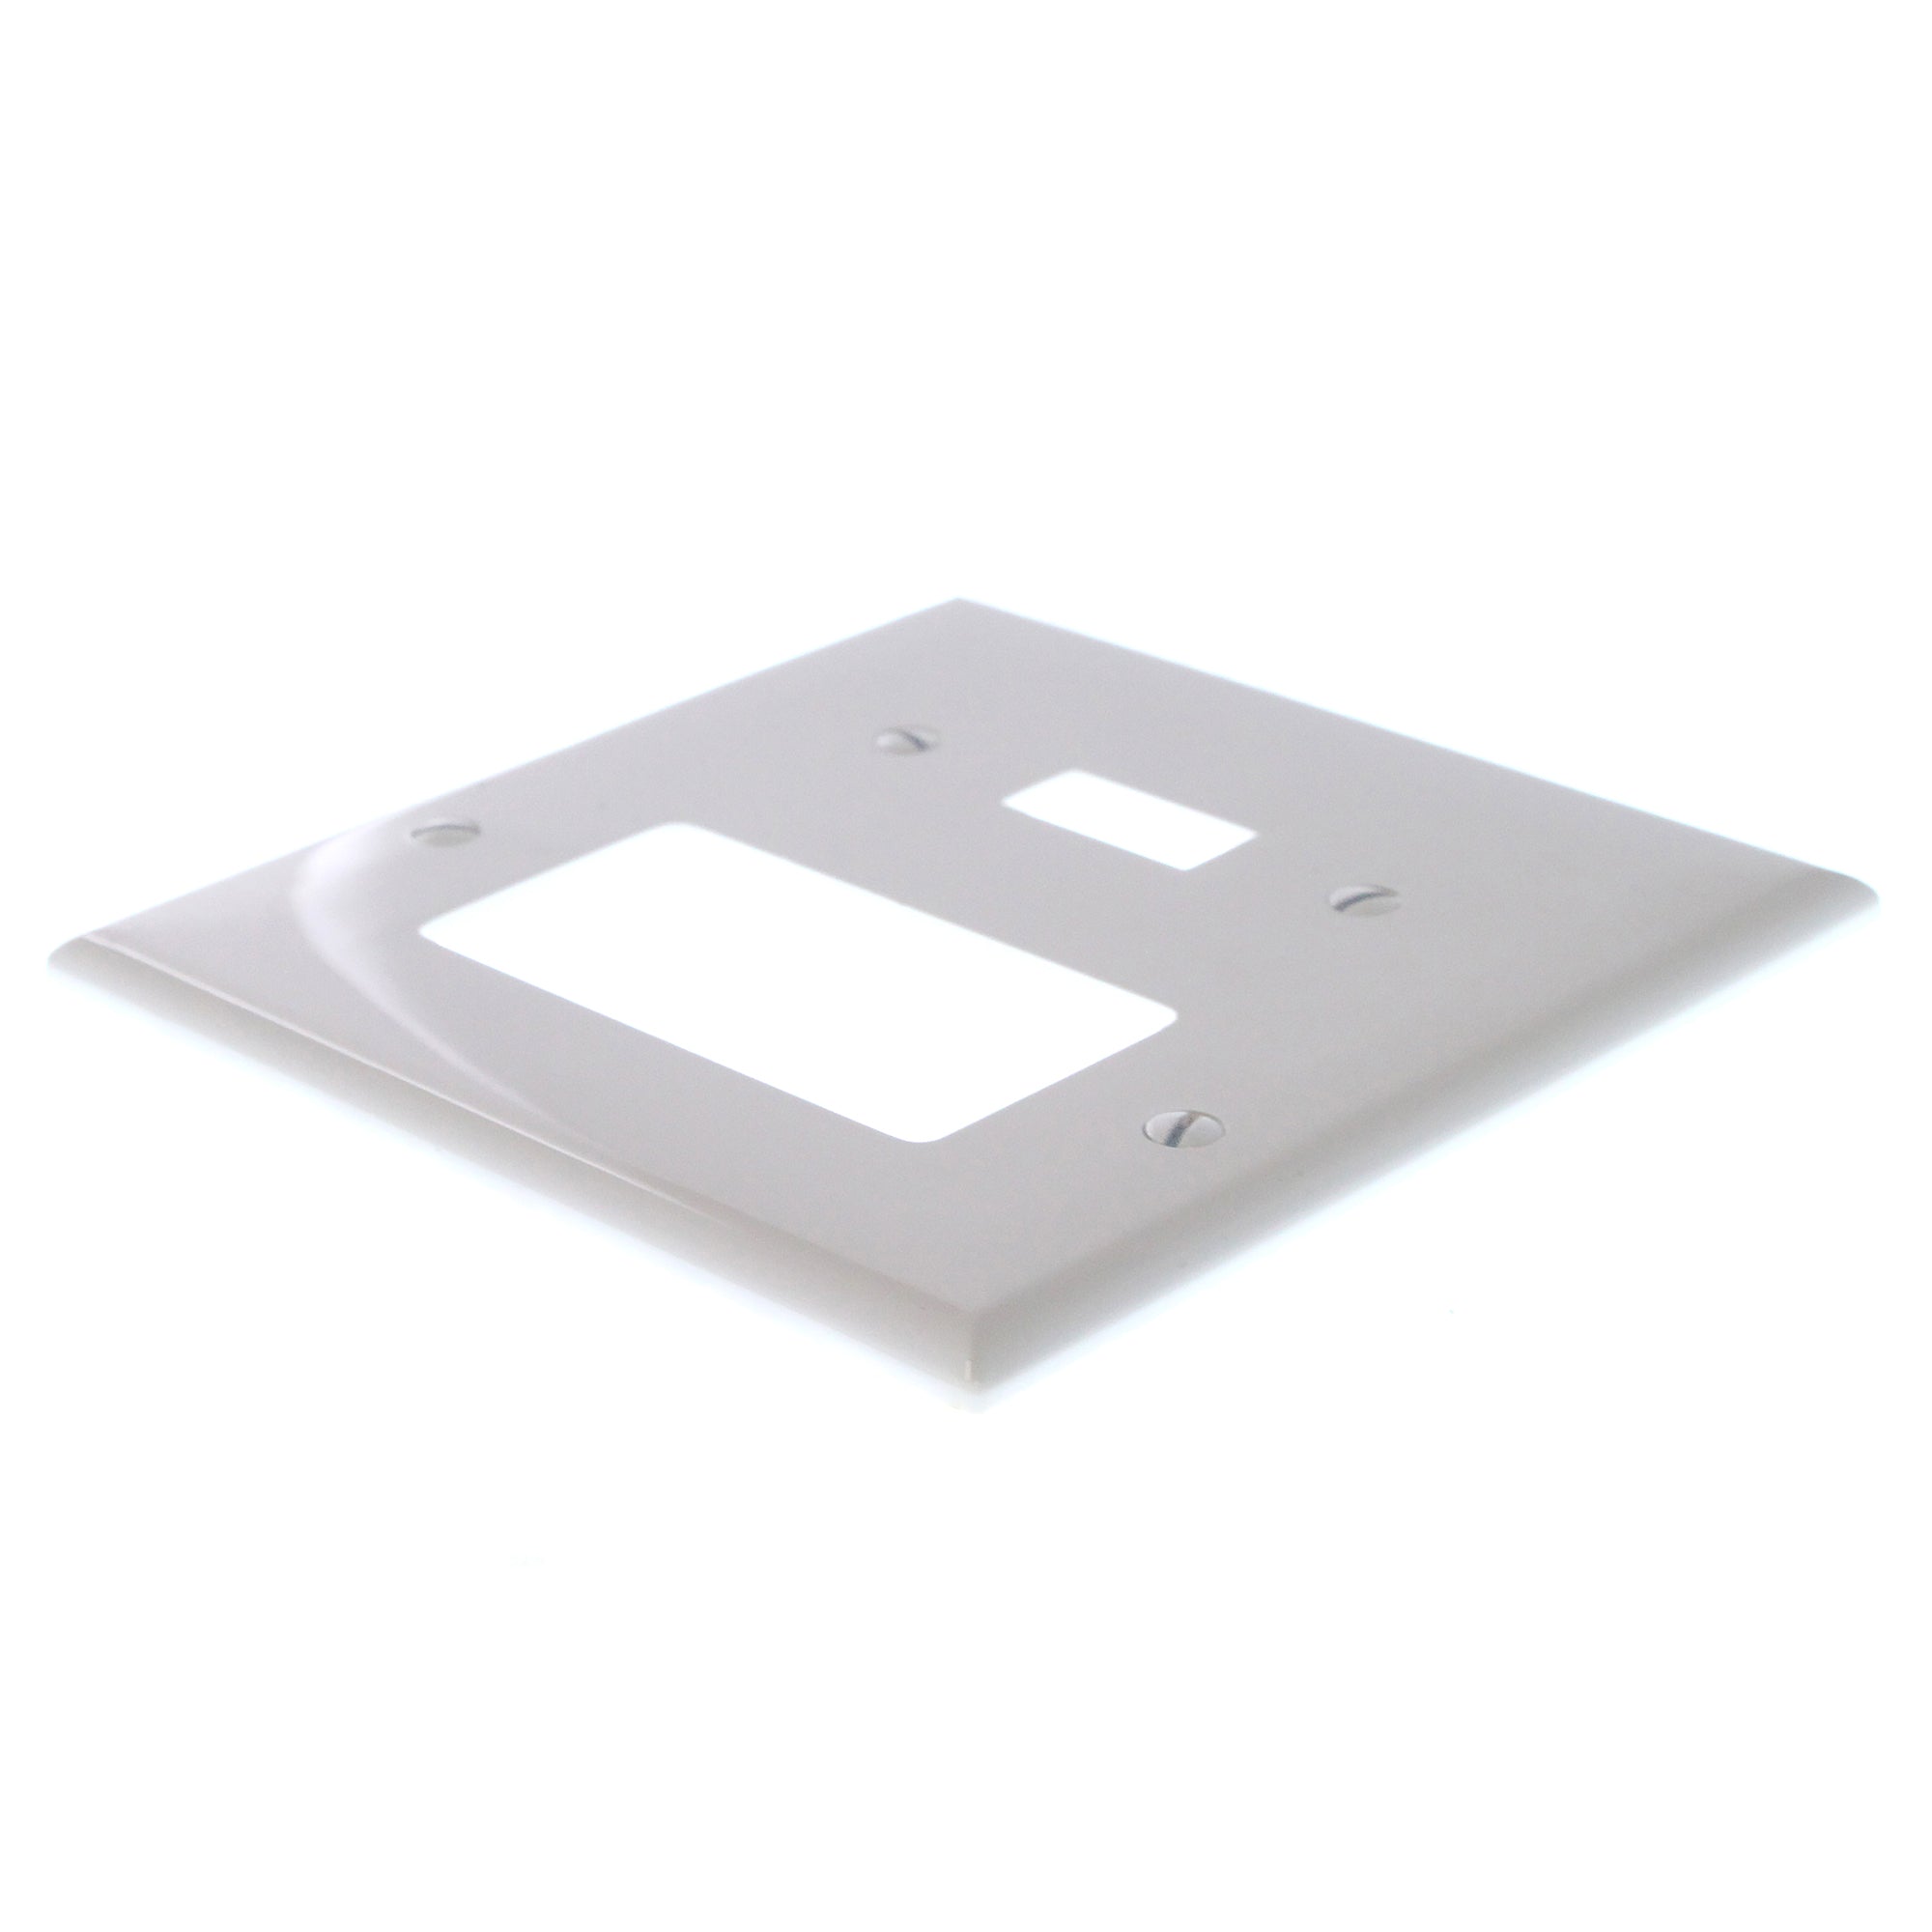 Cooper, COOPER LIGHTING 2 GANG WHITE DECORATOR TOGGLE WALL PLATE PJ126W WHITE (20 PACK)